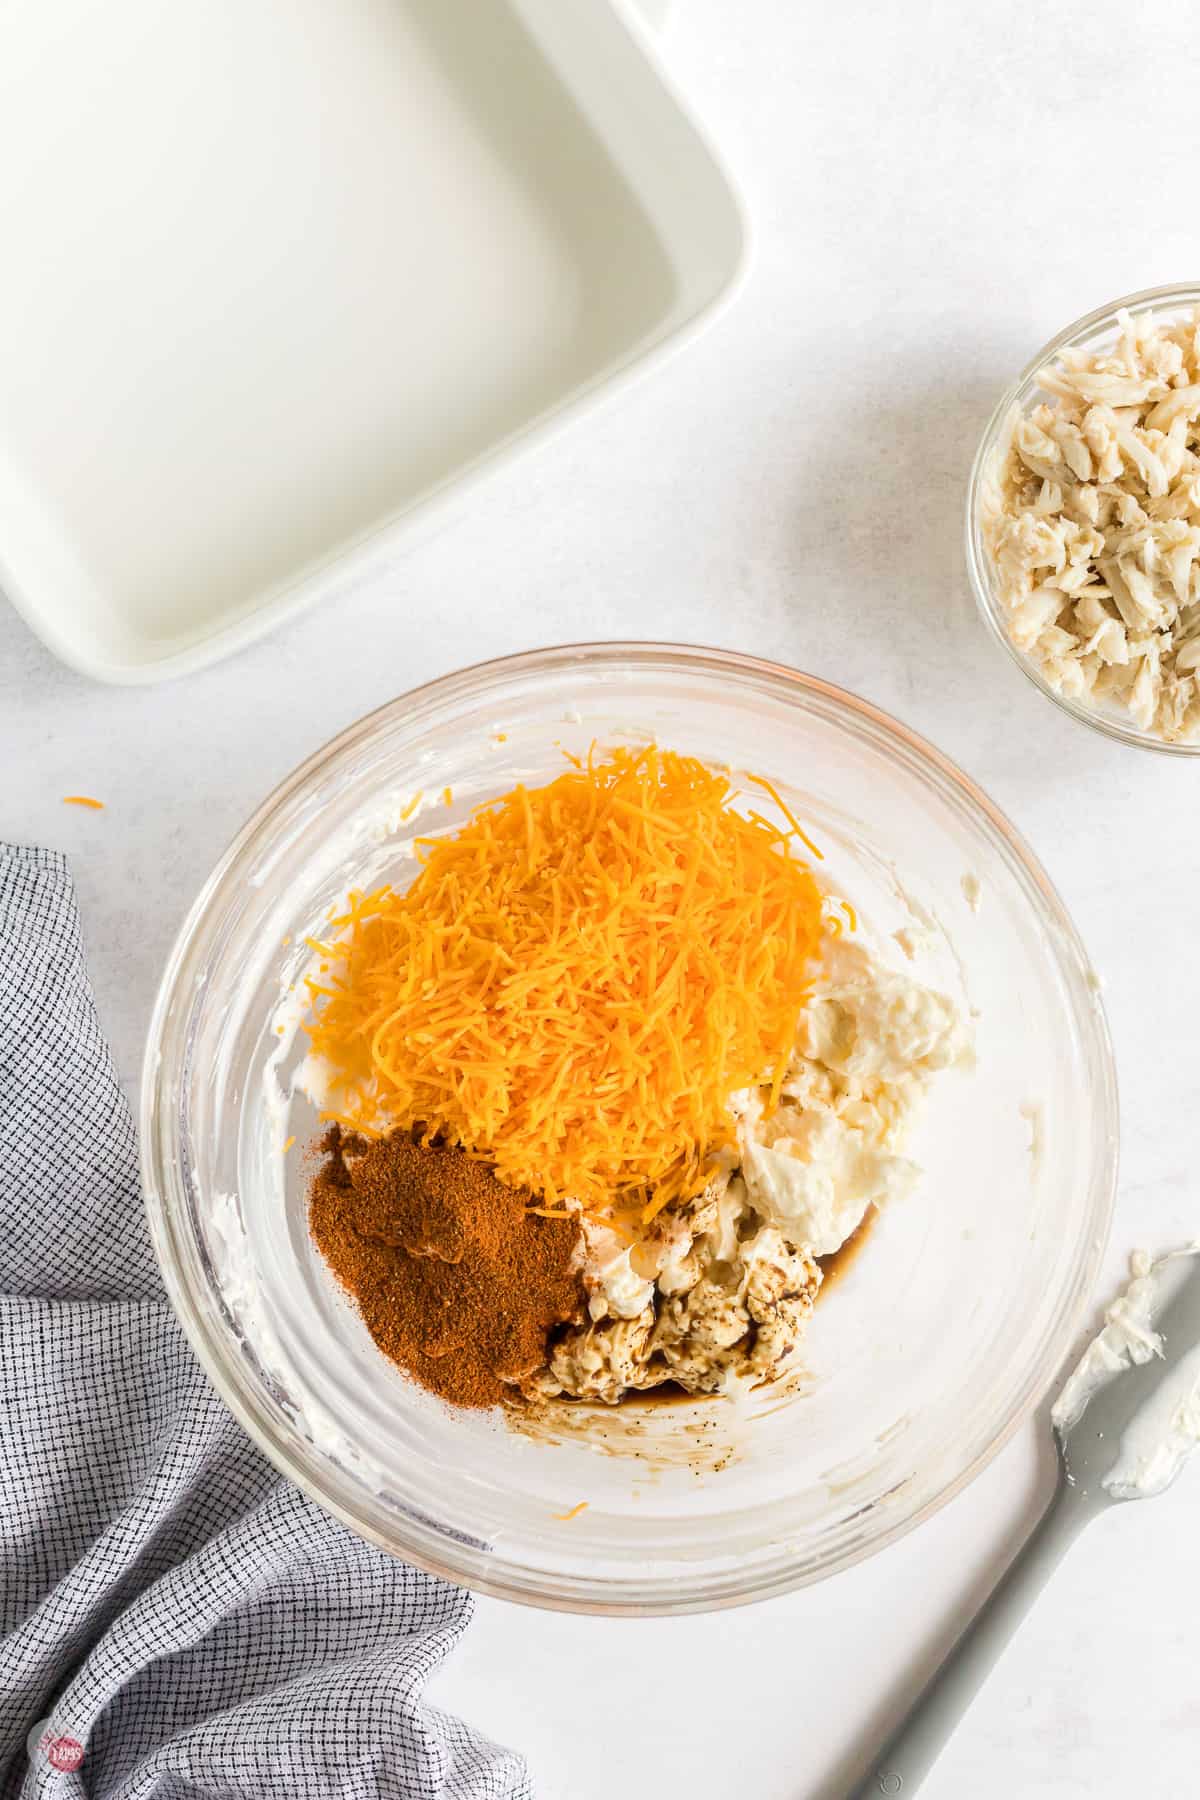 cheese and spices in a bowl